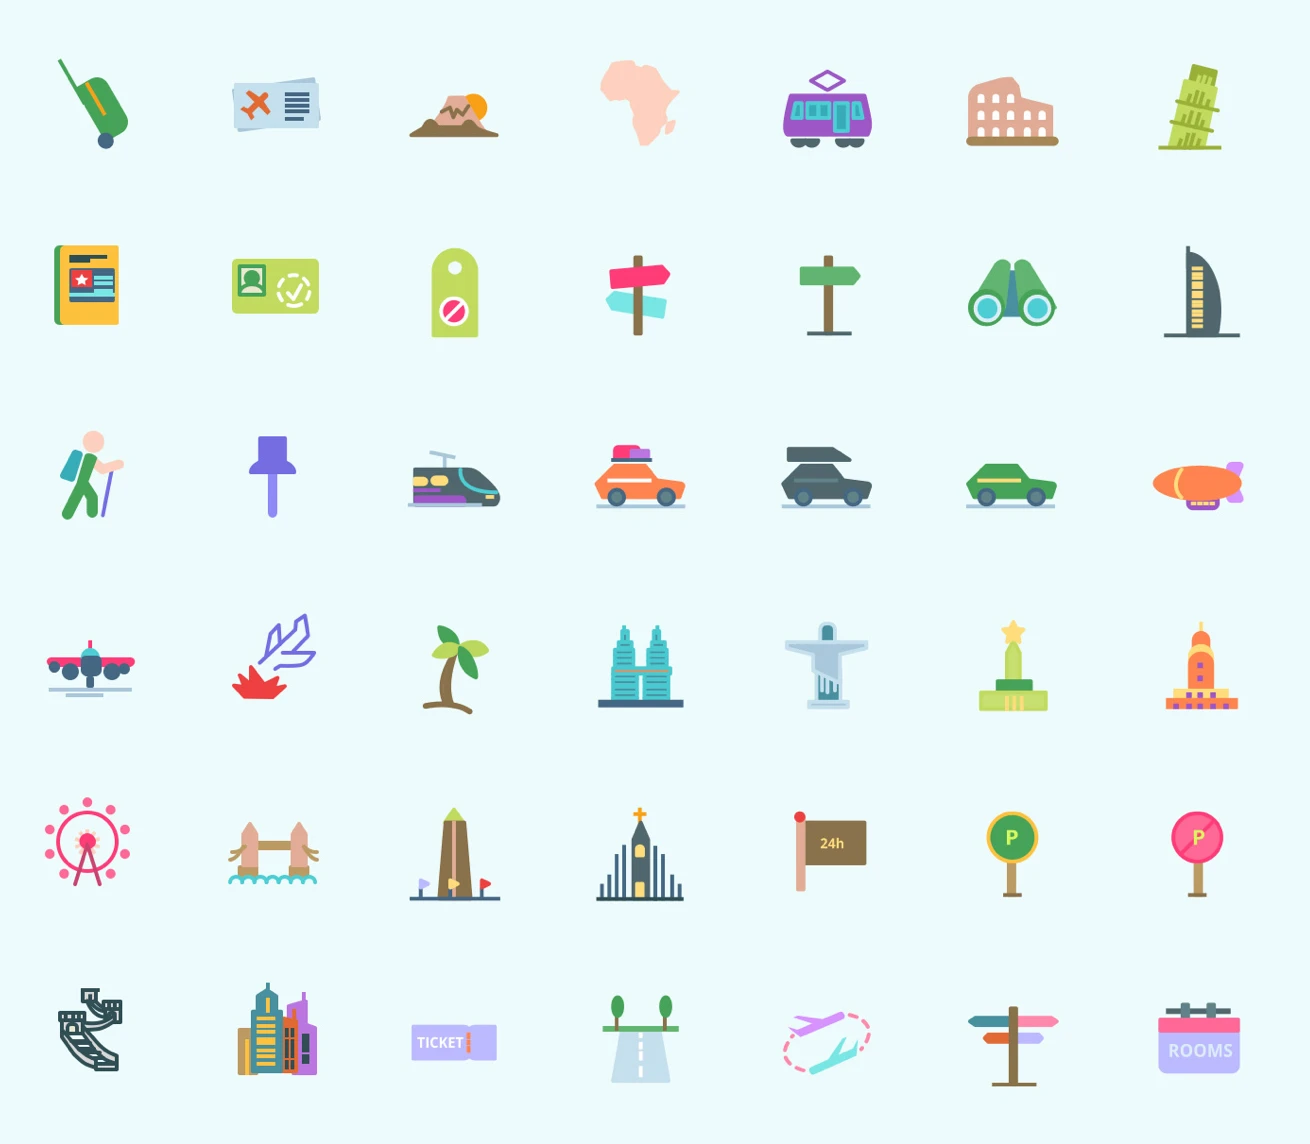 Travel Free Icon Pack - 96 custom, colorful travel icons that will fuel wanderlust. Perfect for adding personality to your travel app, hotel website, travel publication, ecommerce site, or travel-themed content.